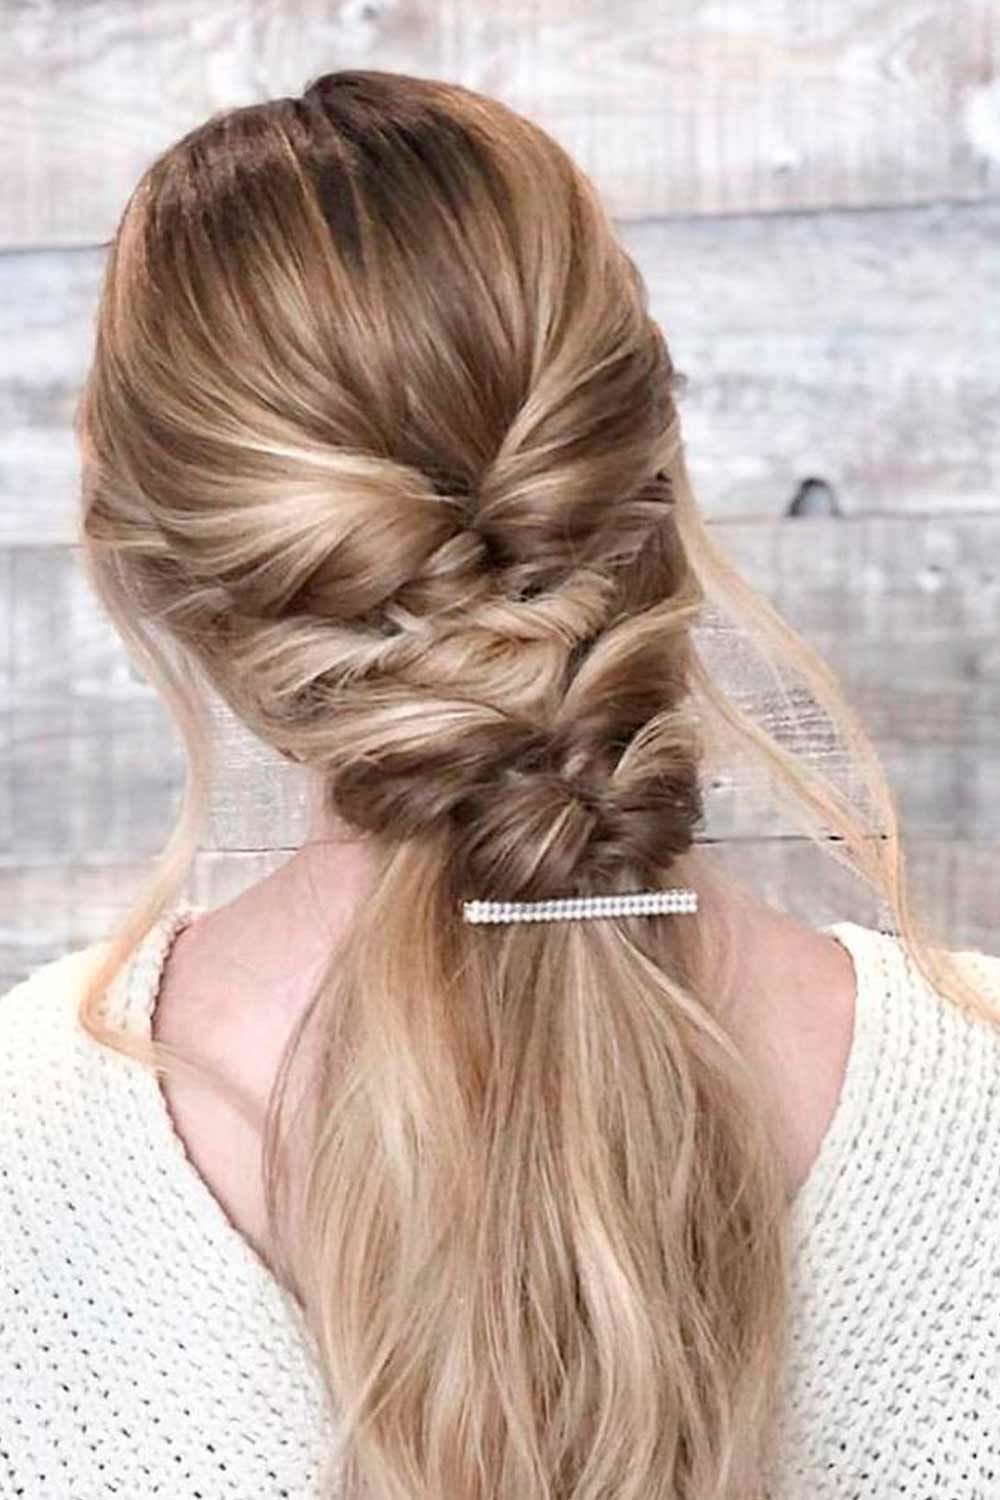 15 Long Ombre Hairstyles to Be Vibrant | LoveHairStyles.com